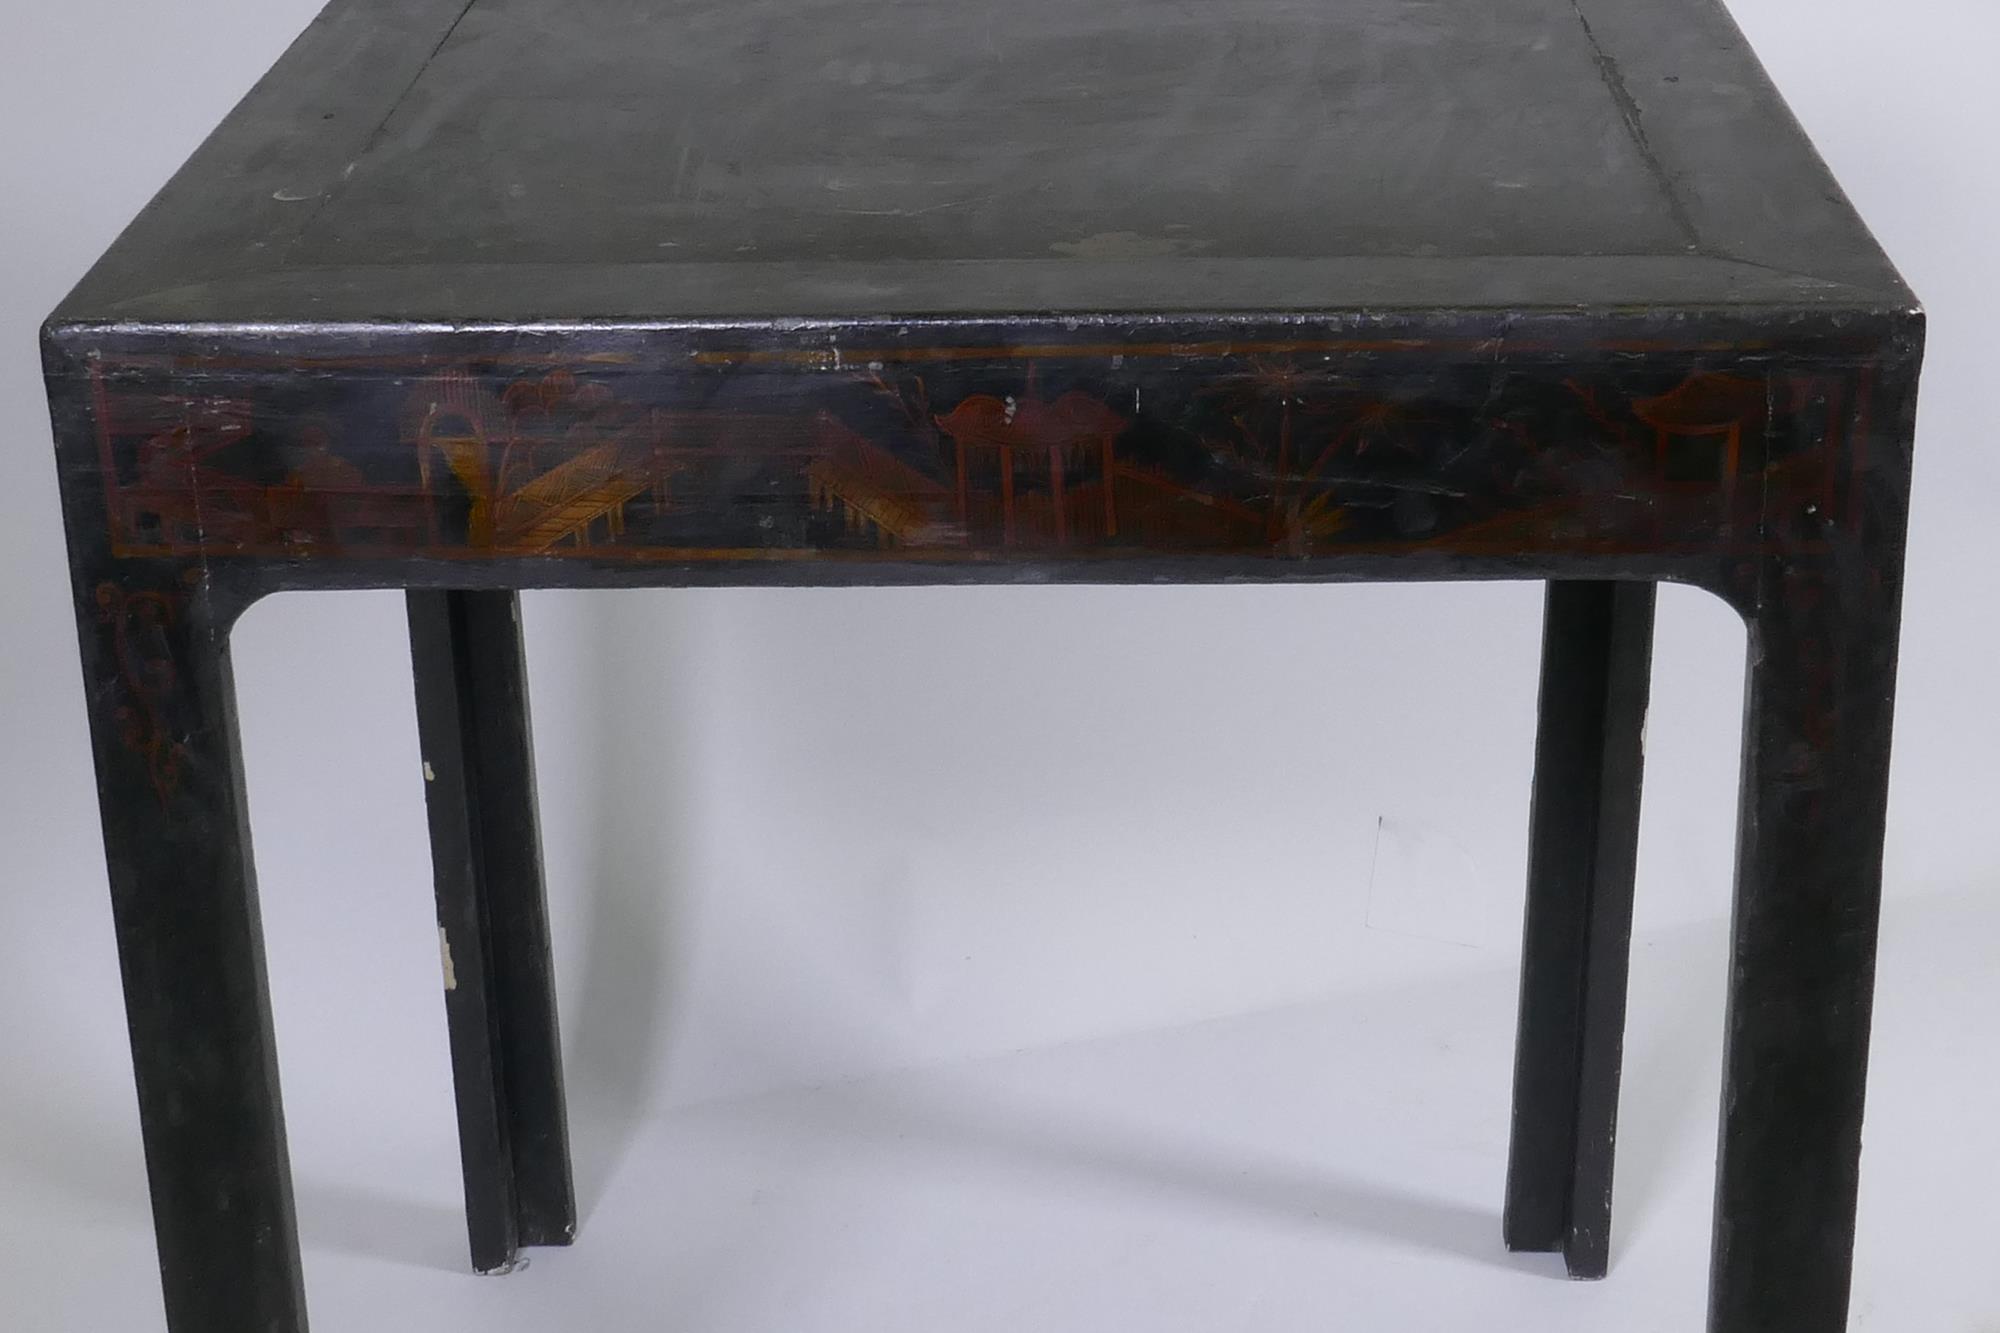 An antique black lacquer chinoiserie table, 63 x 63cm, 70cm high - Image 4 of 4